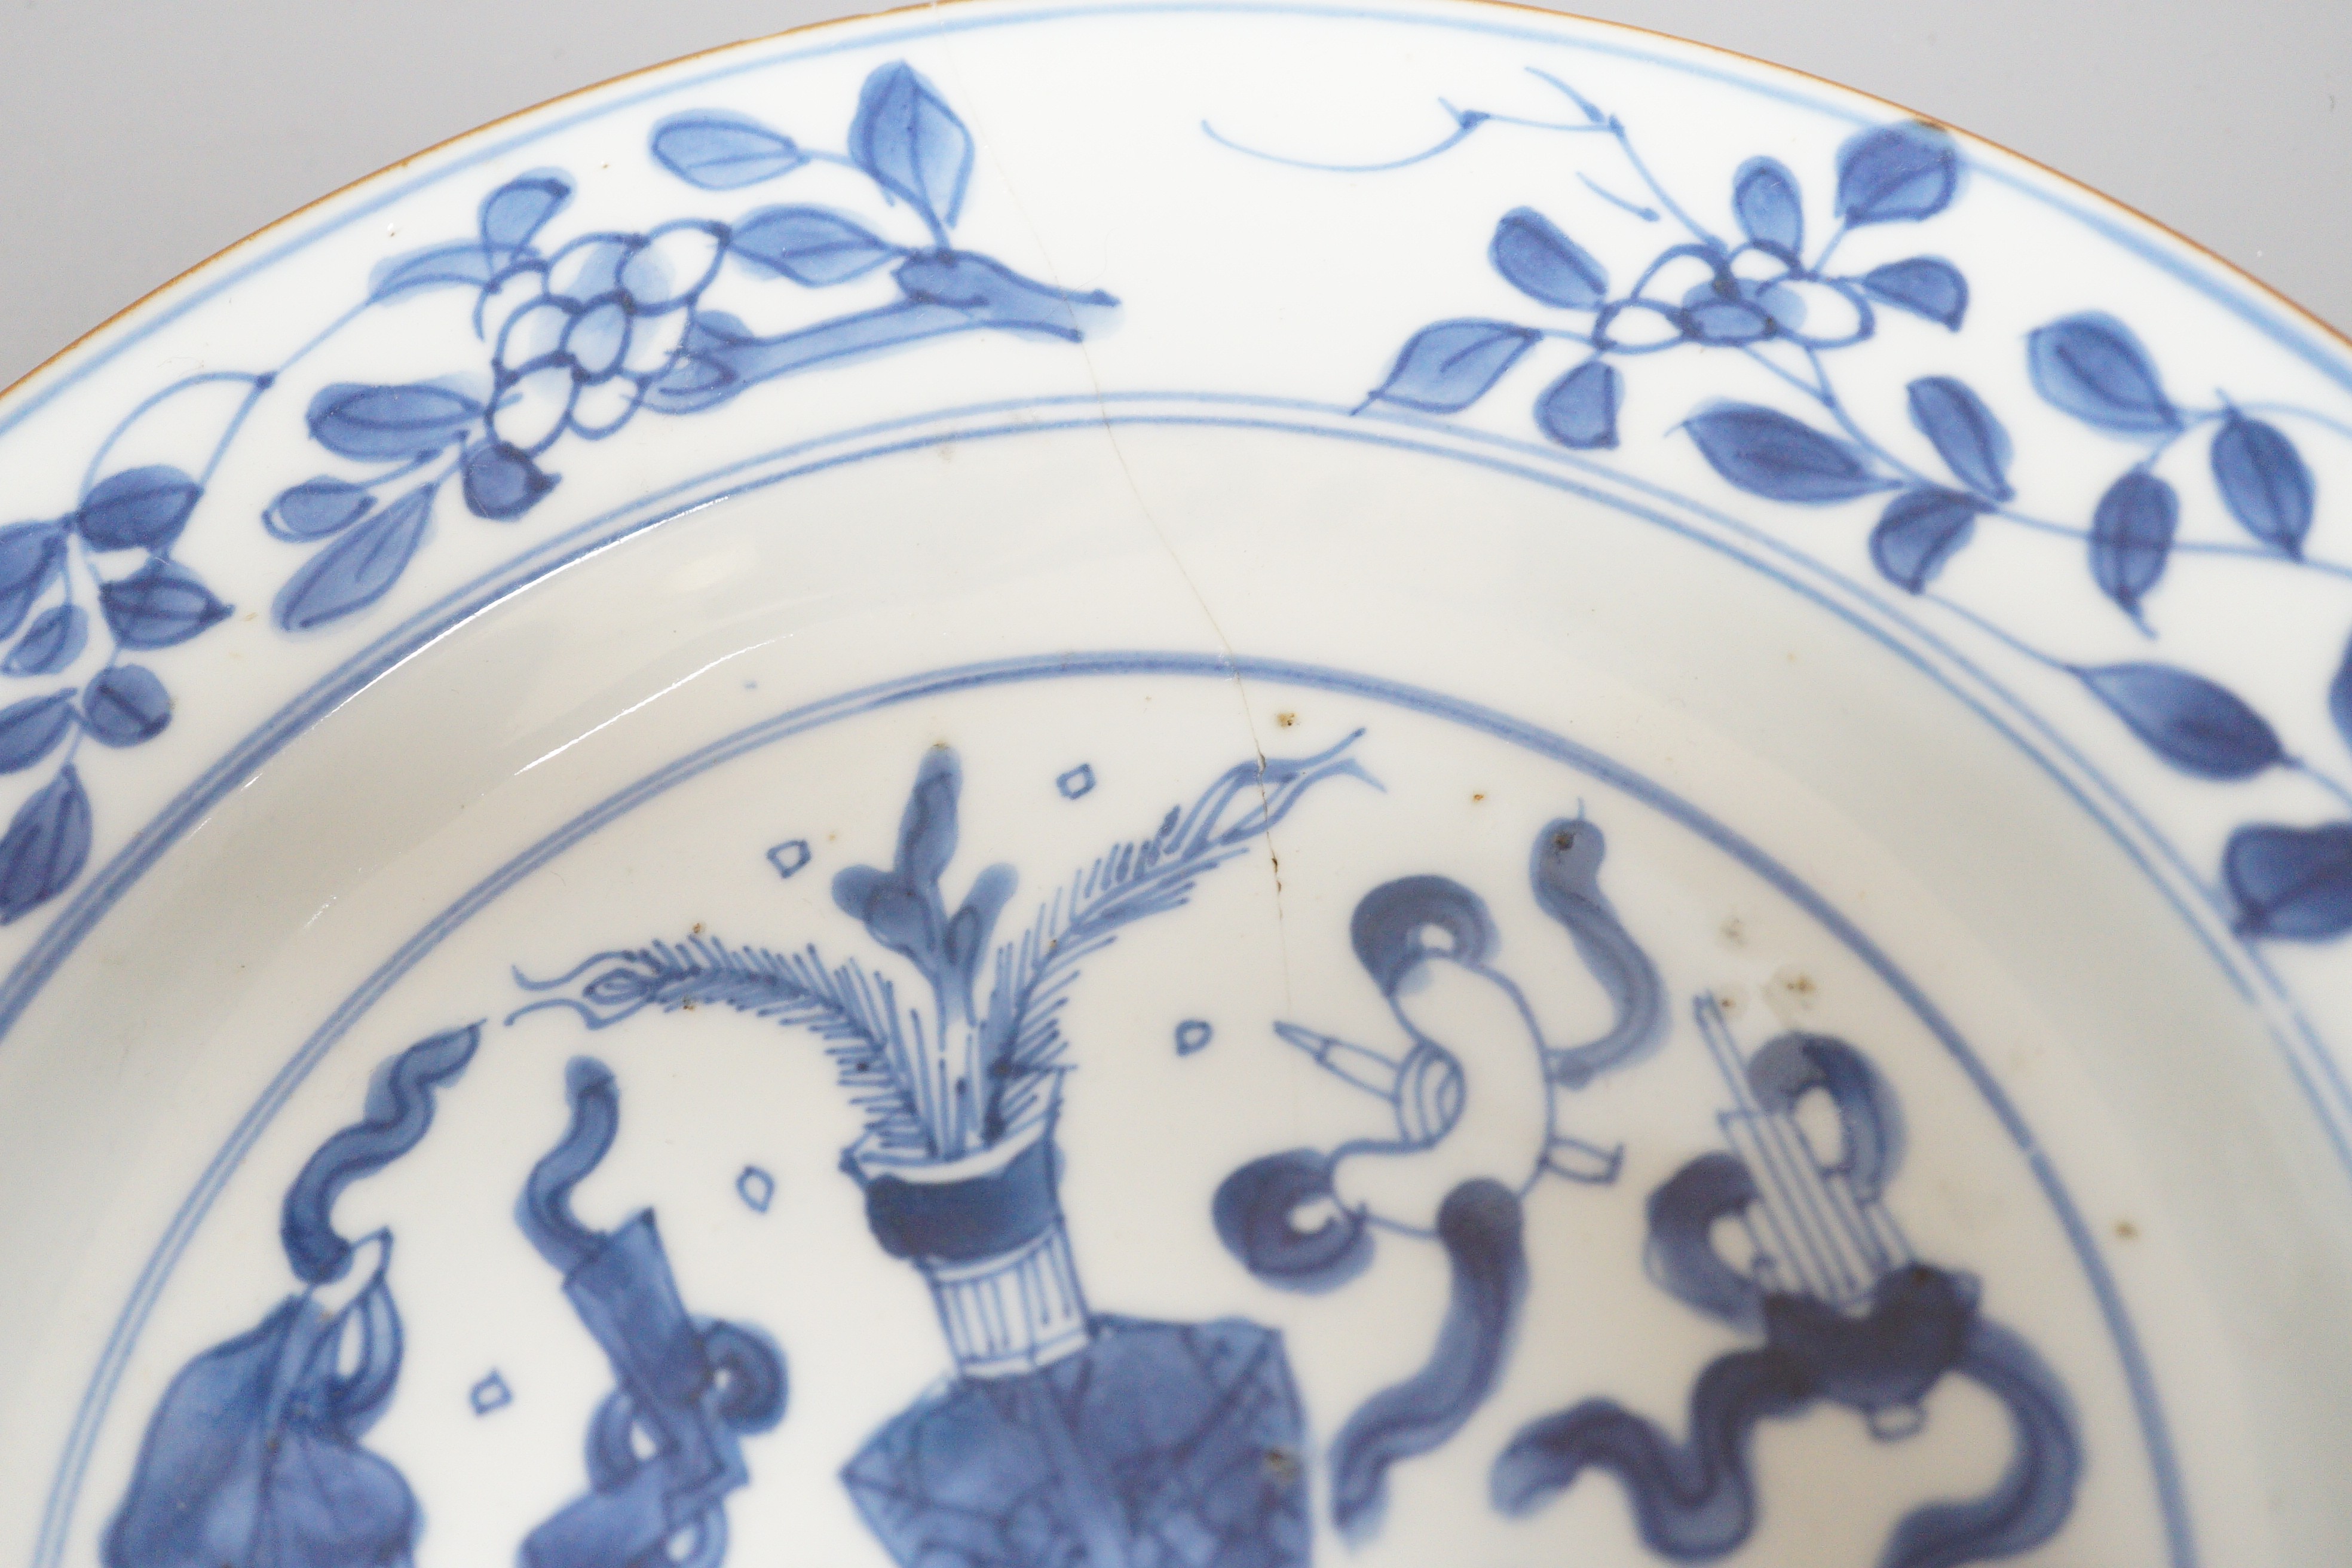 An 18th century Chinese blue and white dish together with other Chinese ceramics, dish diameter 22cm